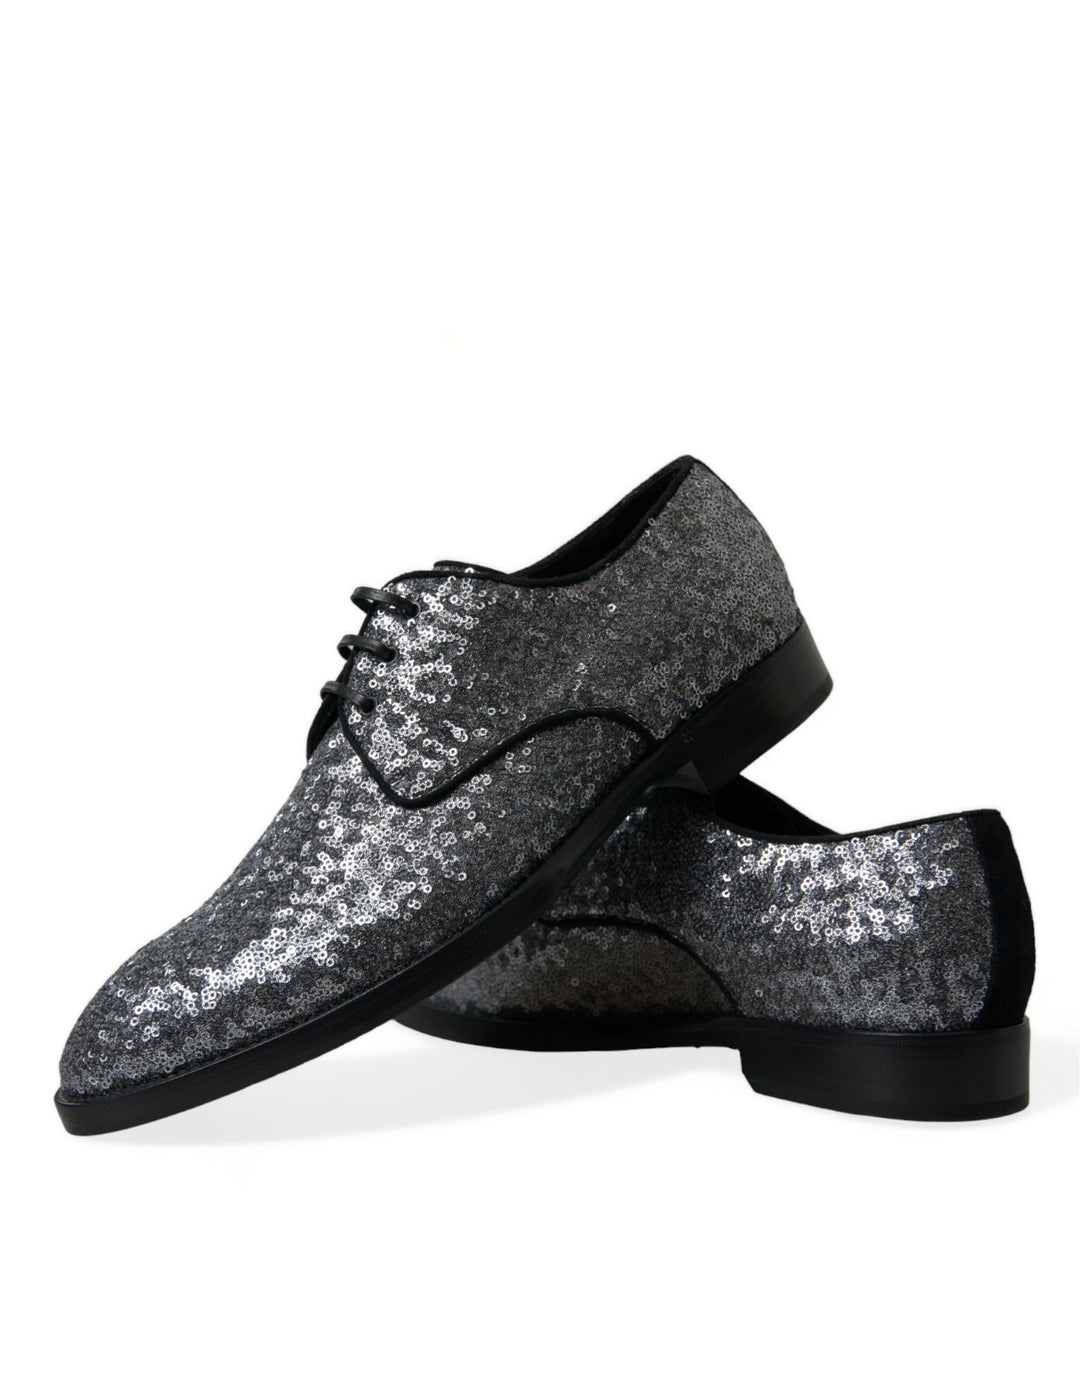 Dolce & Gabbana Exquisite Sequined Derby Dress Shoes